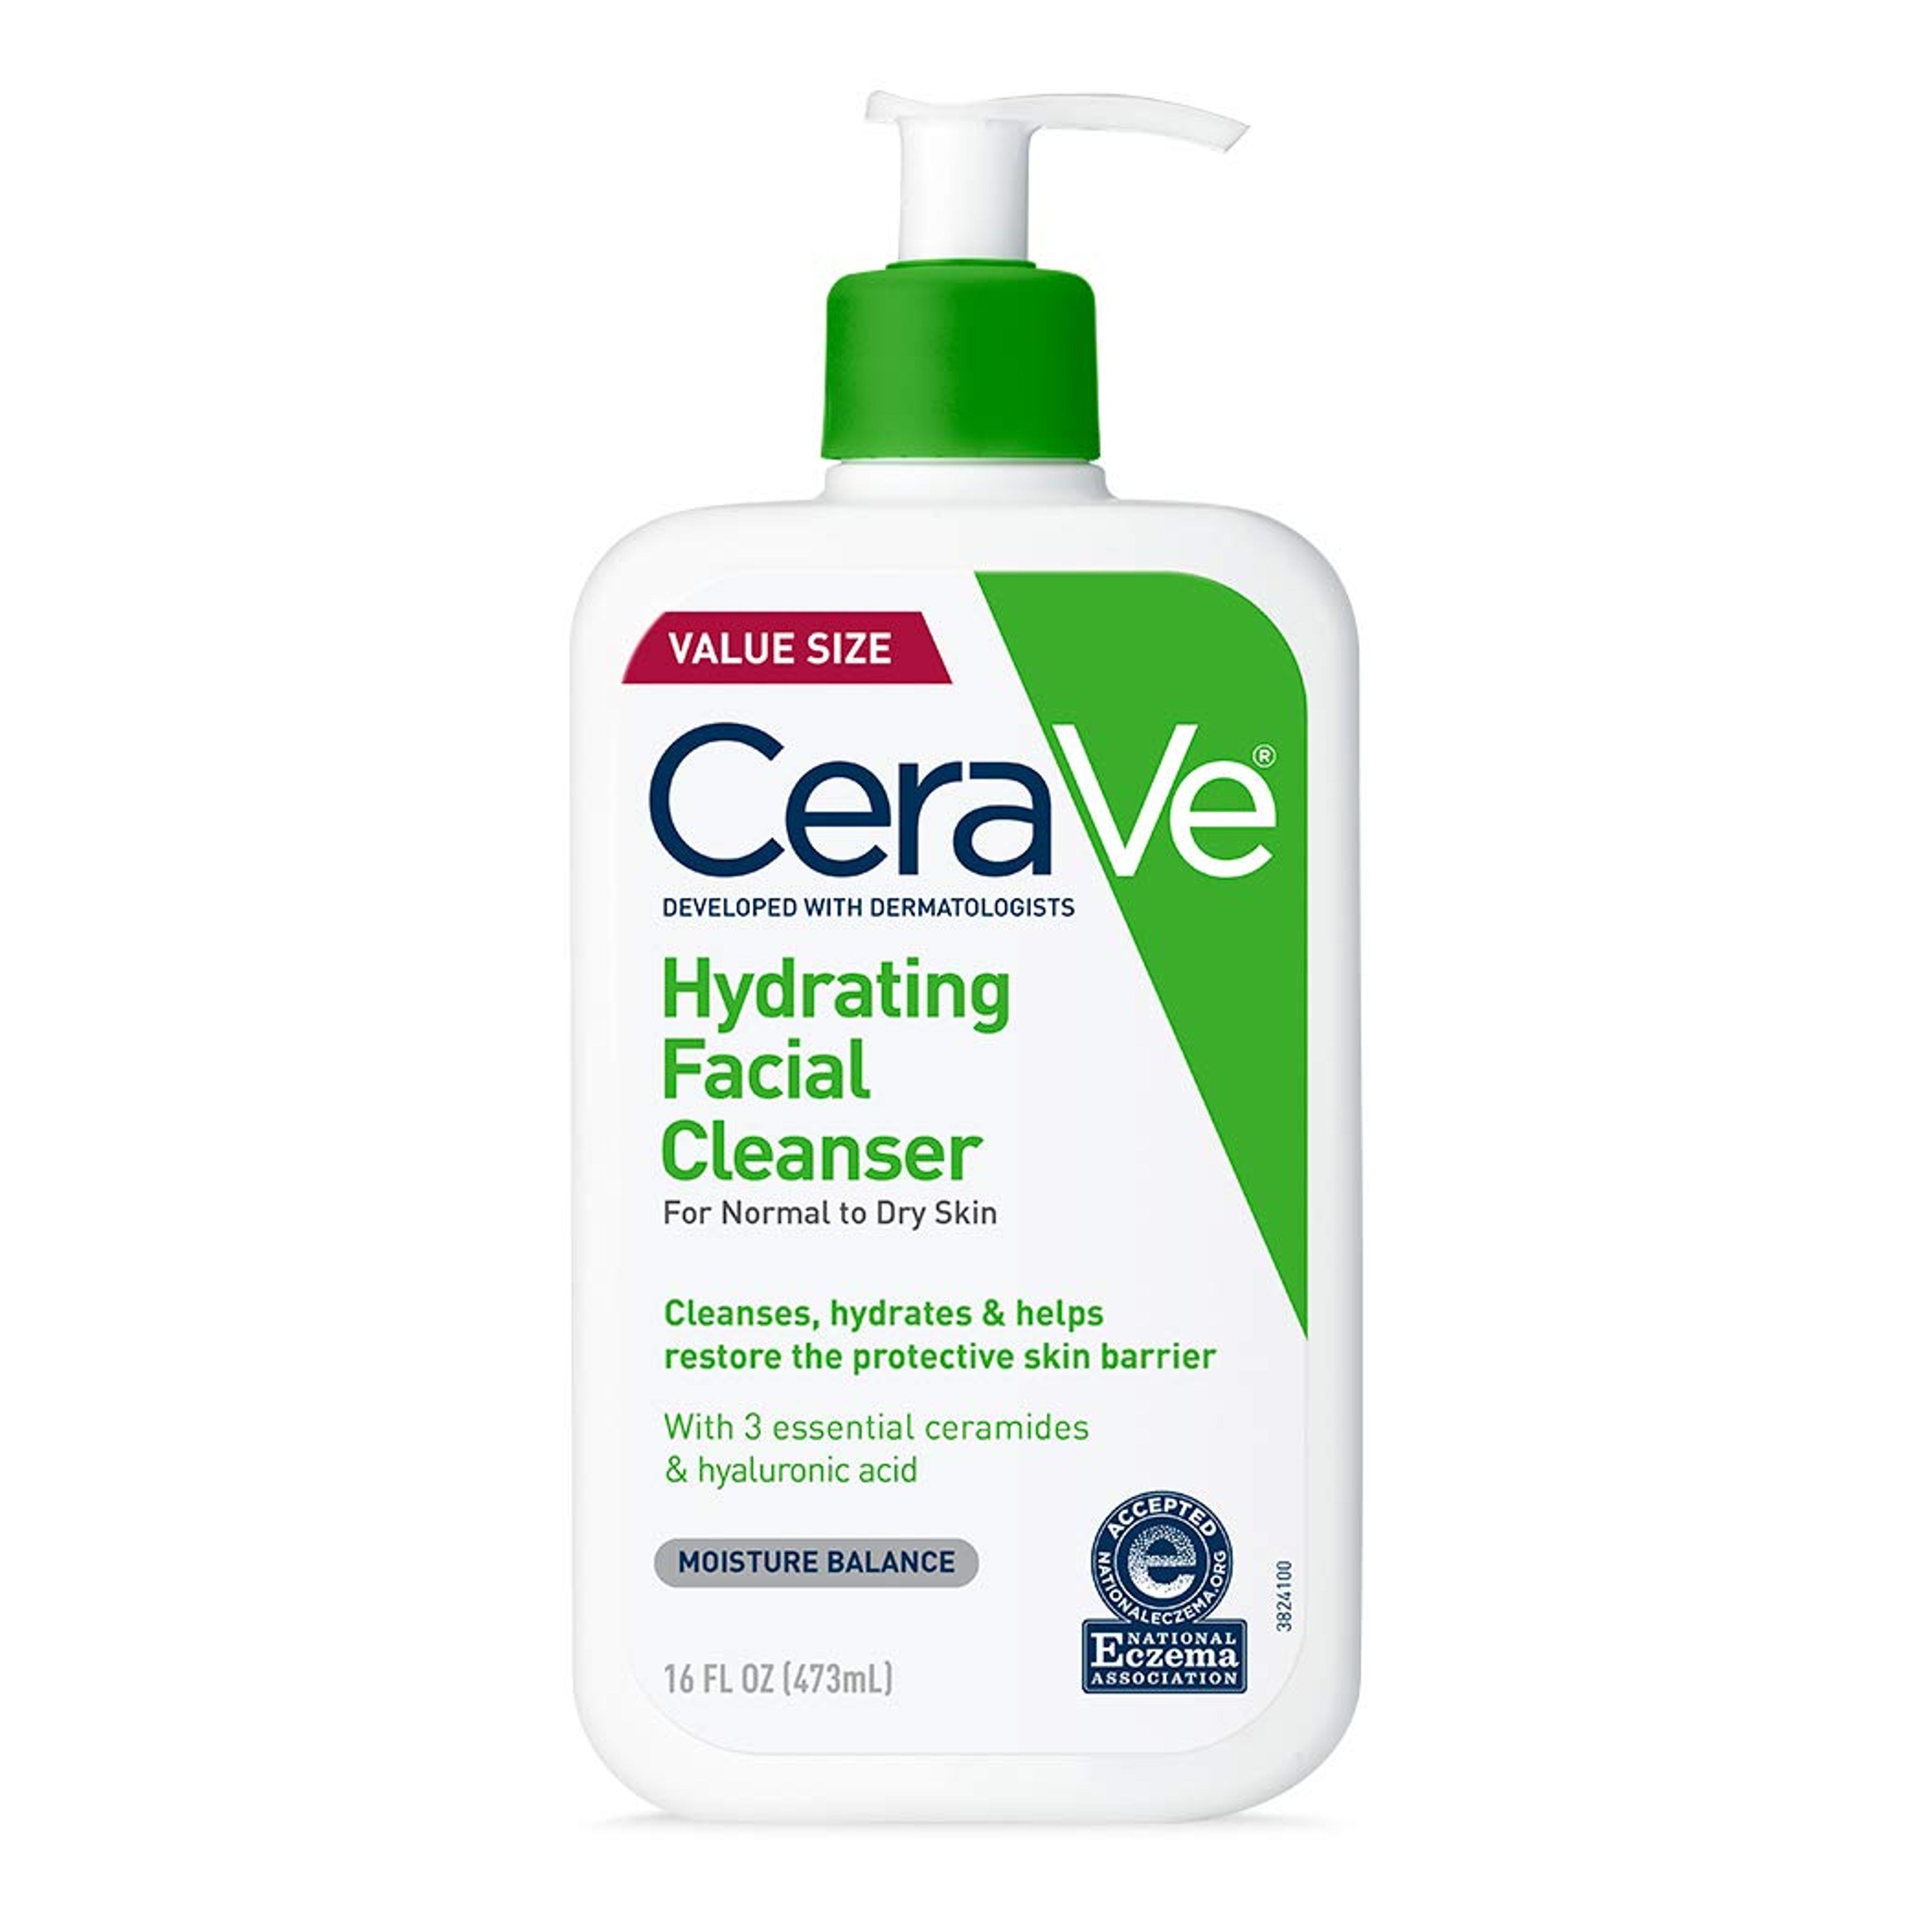 Amazon.com : CeraVe Hydrating Facial Cleanser | Moisturizing Non-Foaming Face Wash with Hyaluronic Acid, Ceramides and Glycerin | Fragrance Free Paraben Free | 16 Fluid Ounce : Beauty & Personal Care